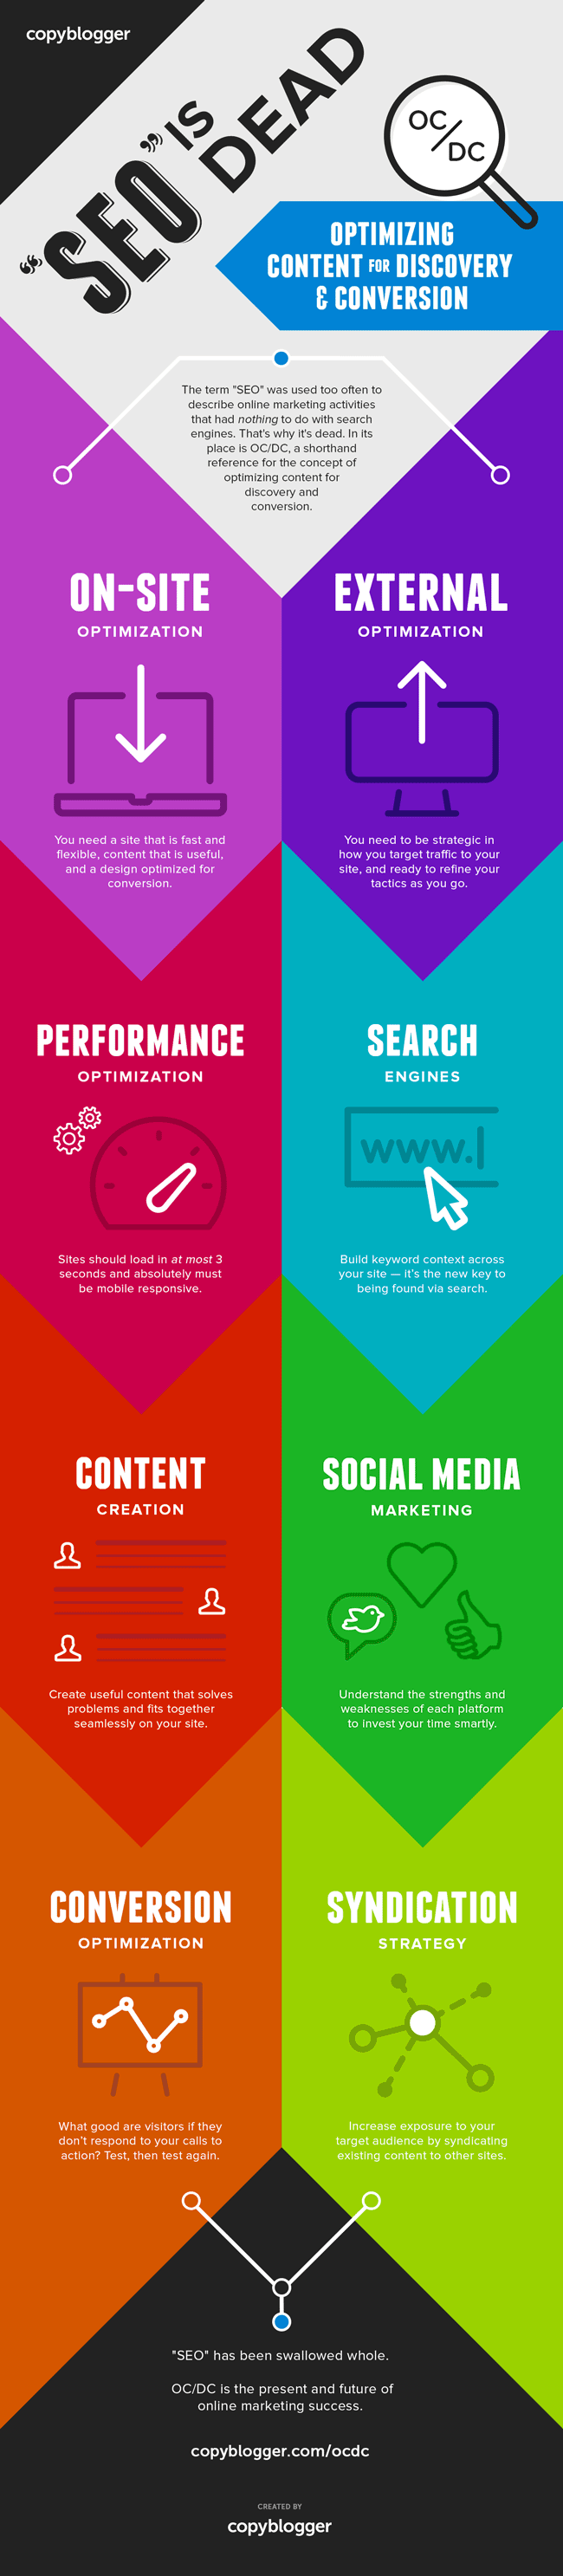 SEO is Dead - Infographic